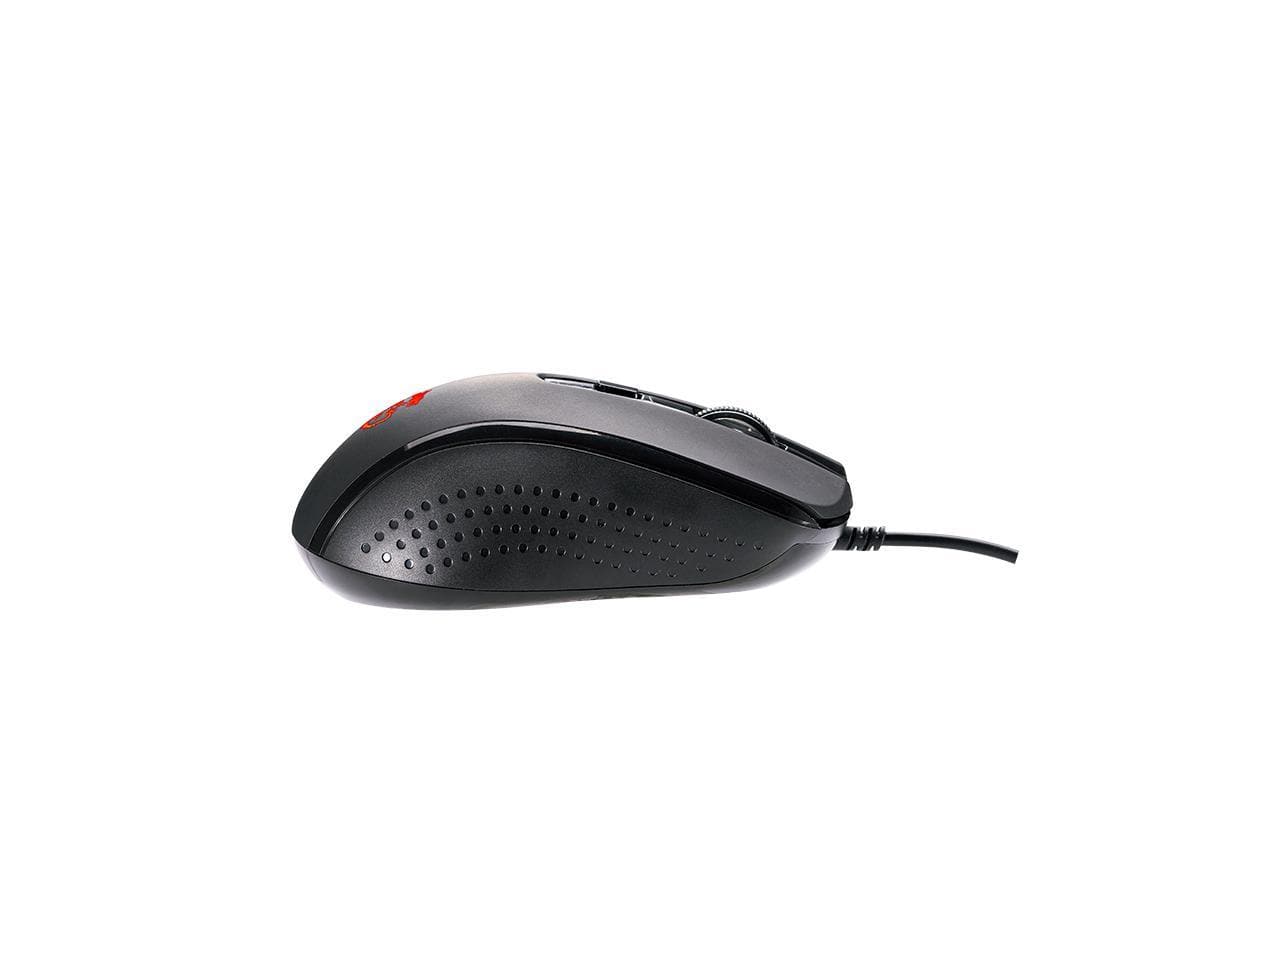 MSI GAMING MOUSE MSI DS86 Wired Gaming Mouse - LED Lighting